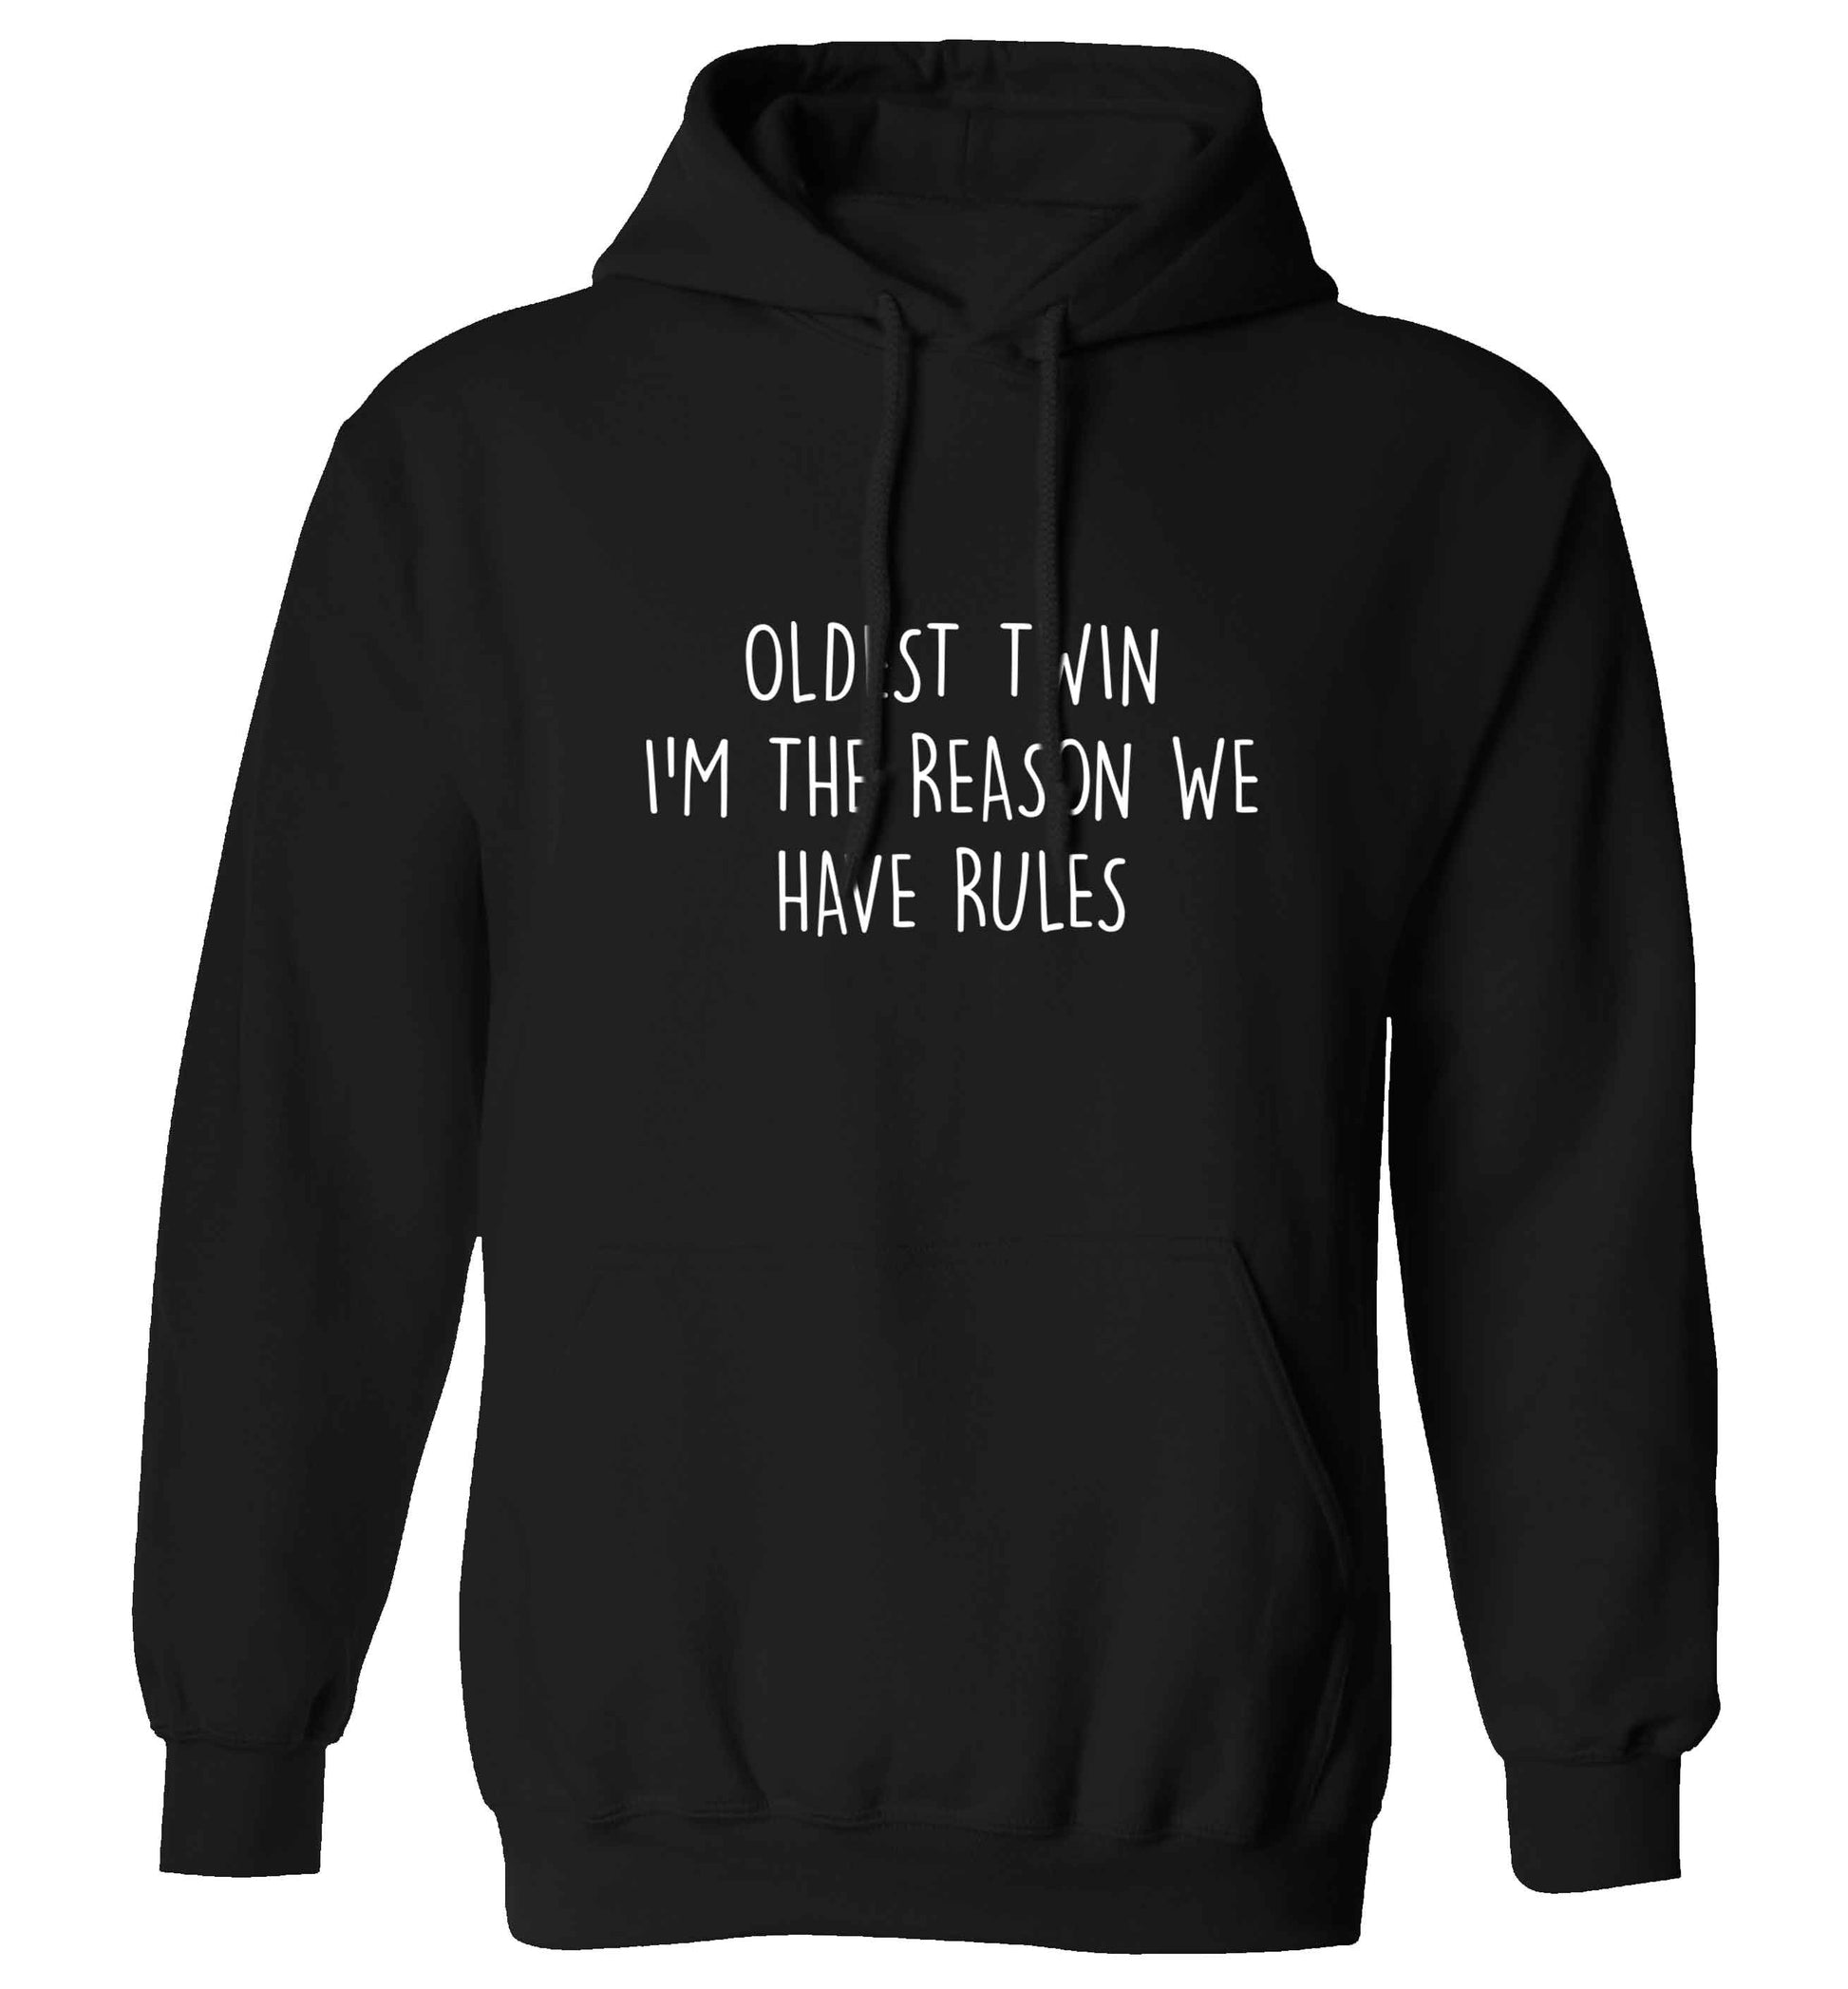 Oldest twin I'm the reason we have rules adults unisex black hoodie 2XL